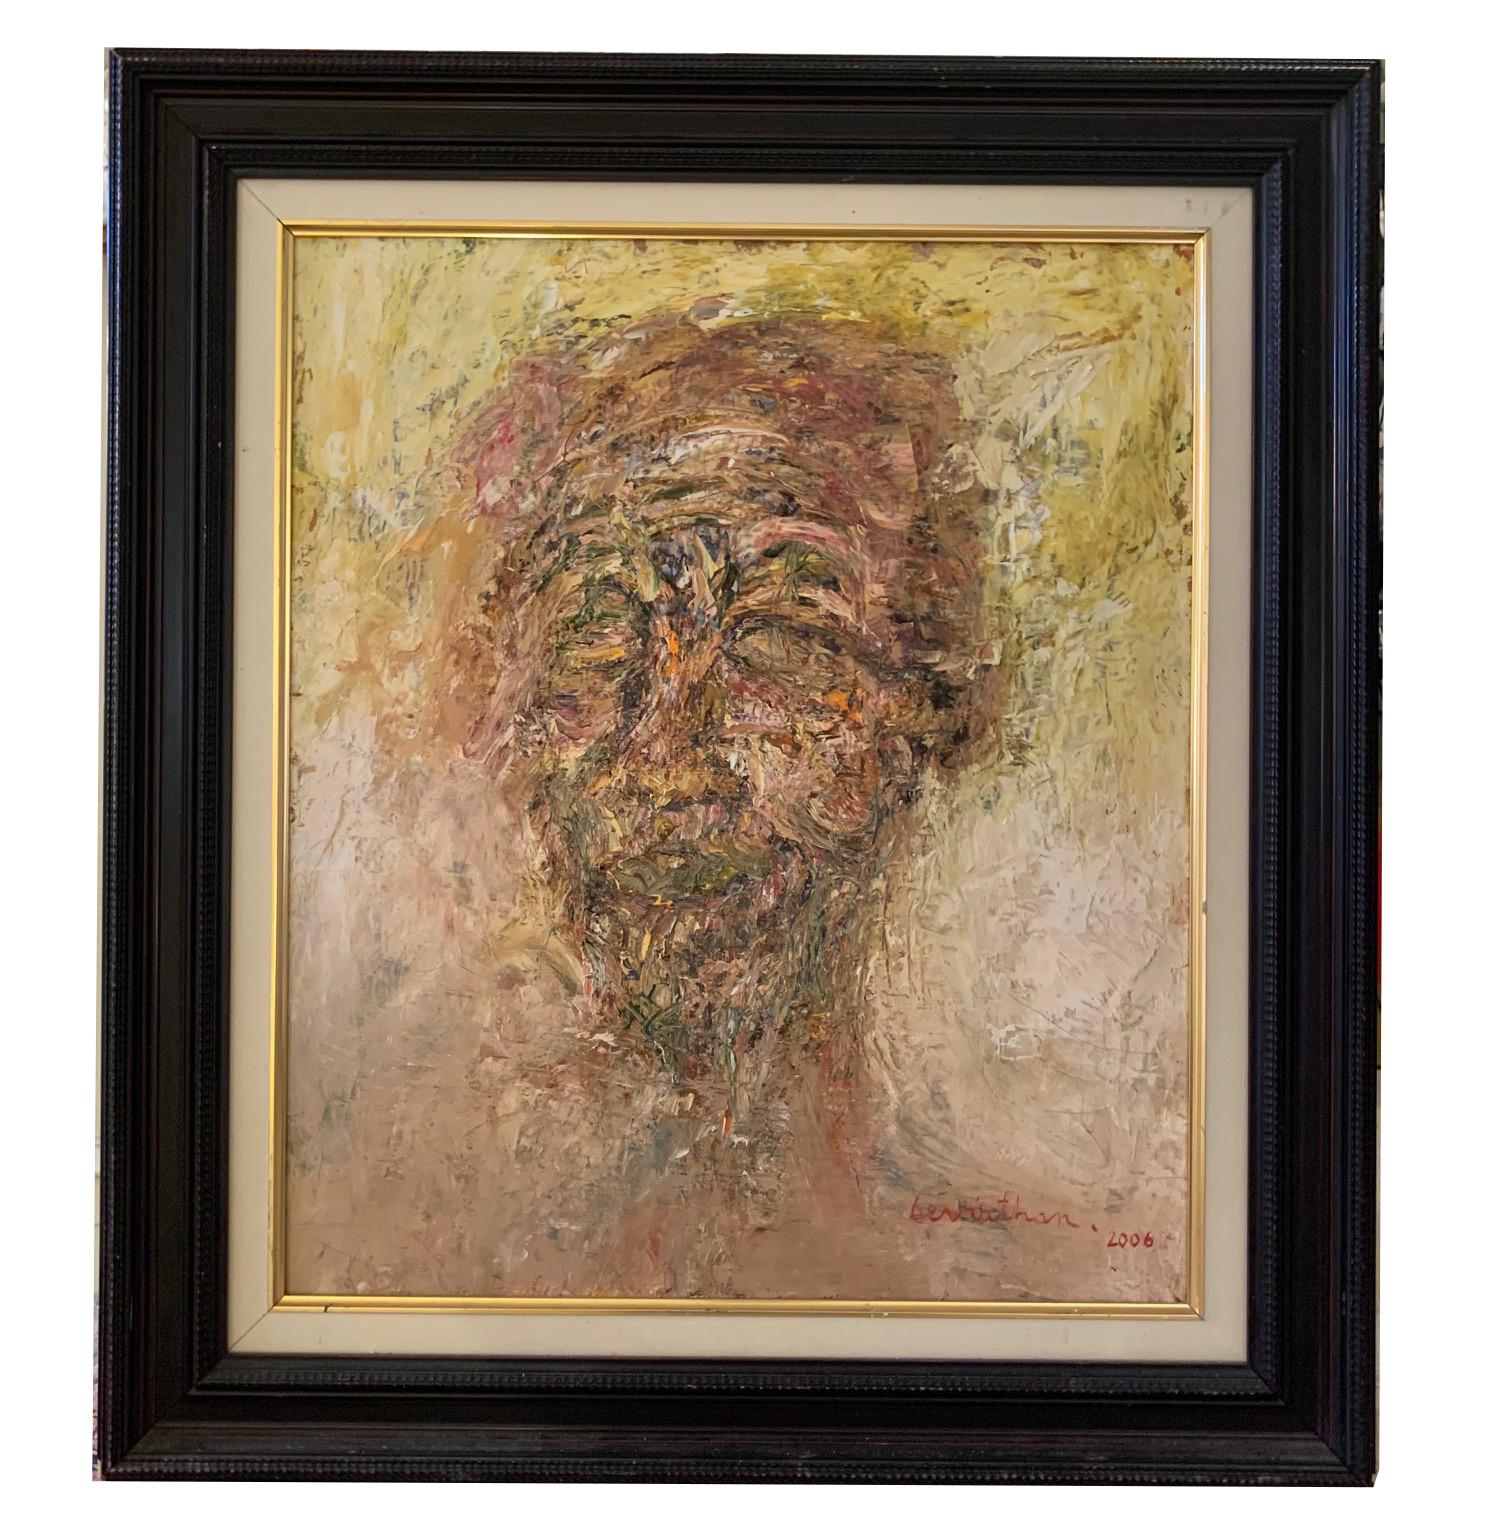 'Portrait Of An Old Man’ Contemporary  Natural Colors Oil On Canvas By Leviathan - Expressionist Painting by David Leviathan